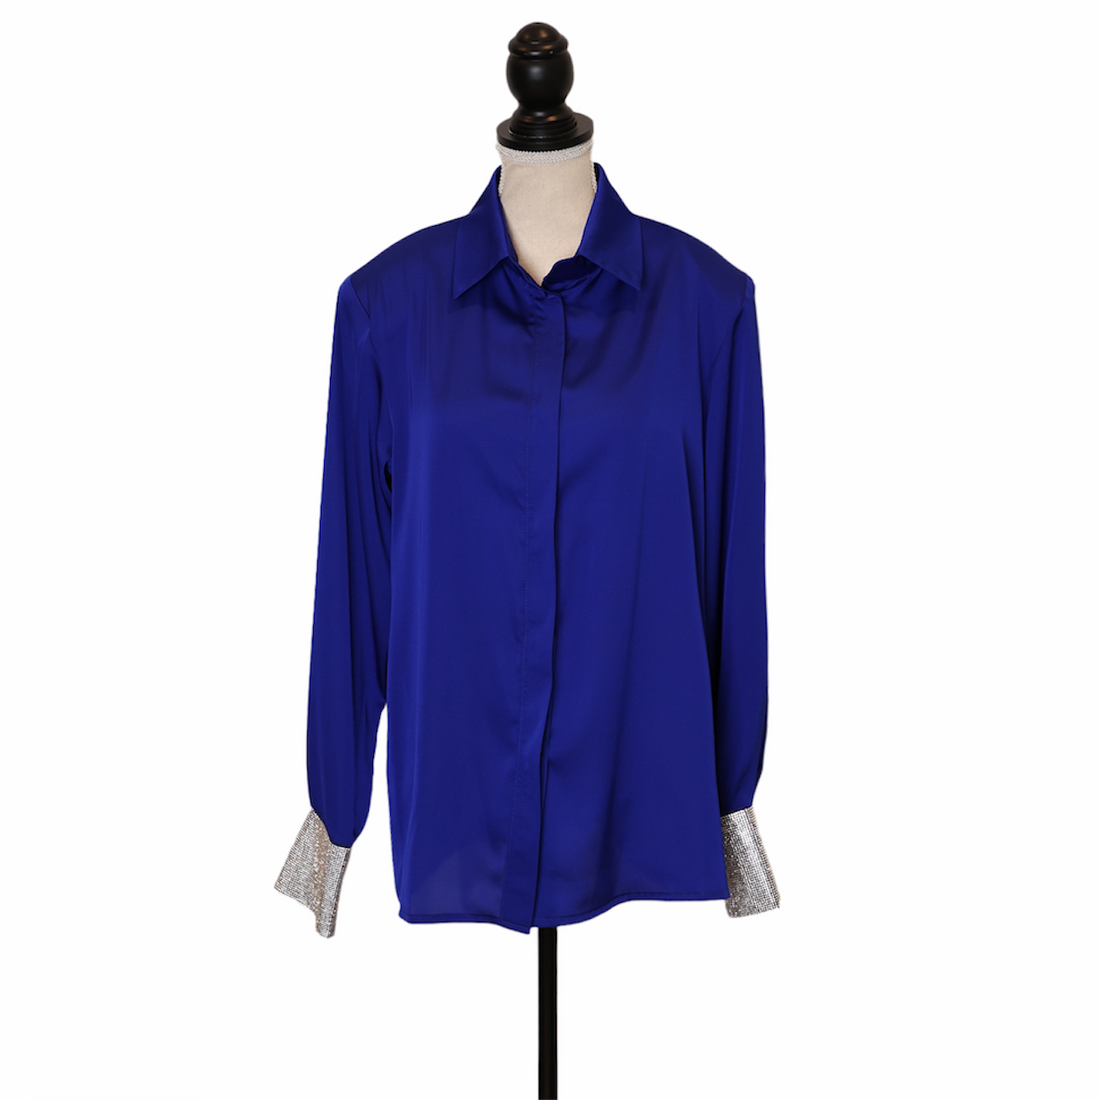 NN 80's style shirt with crystal cuffs and shoulder pads